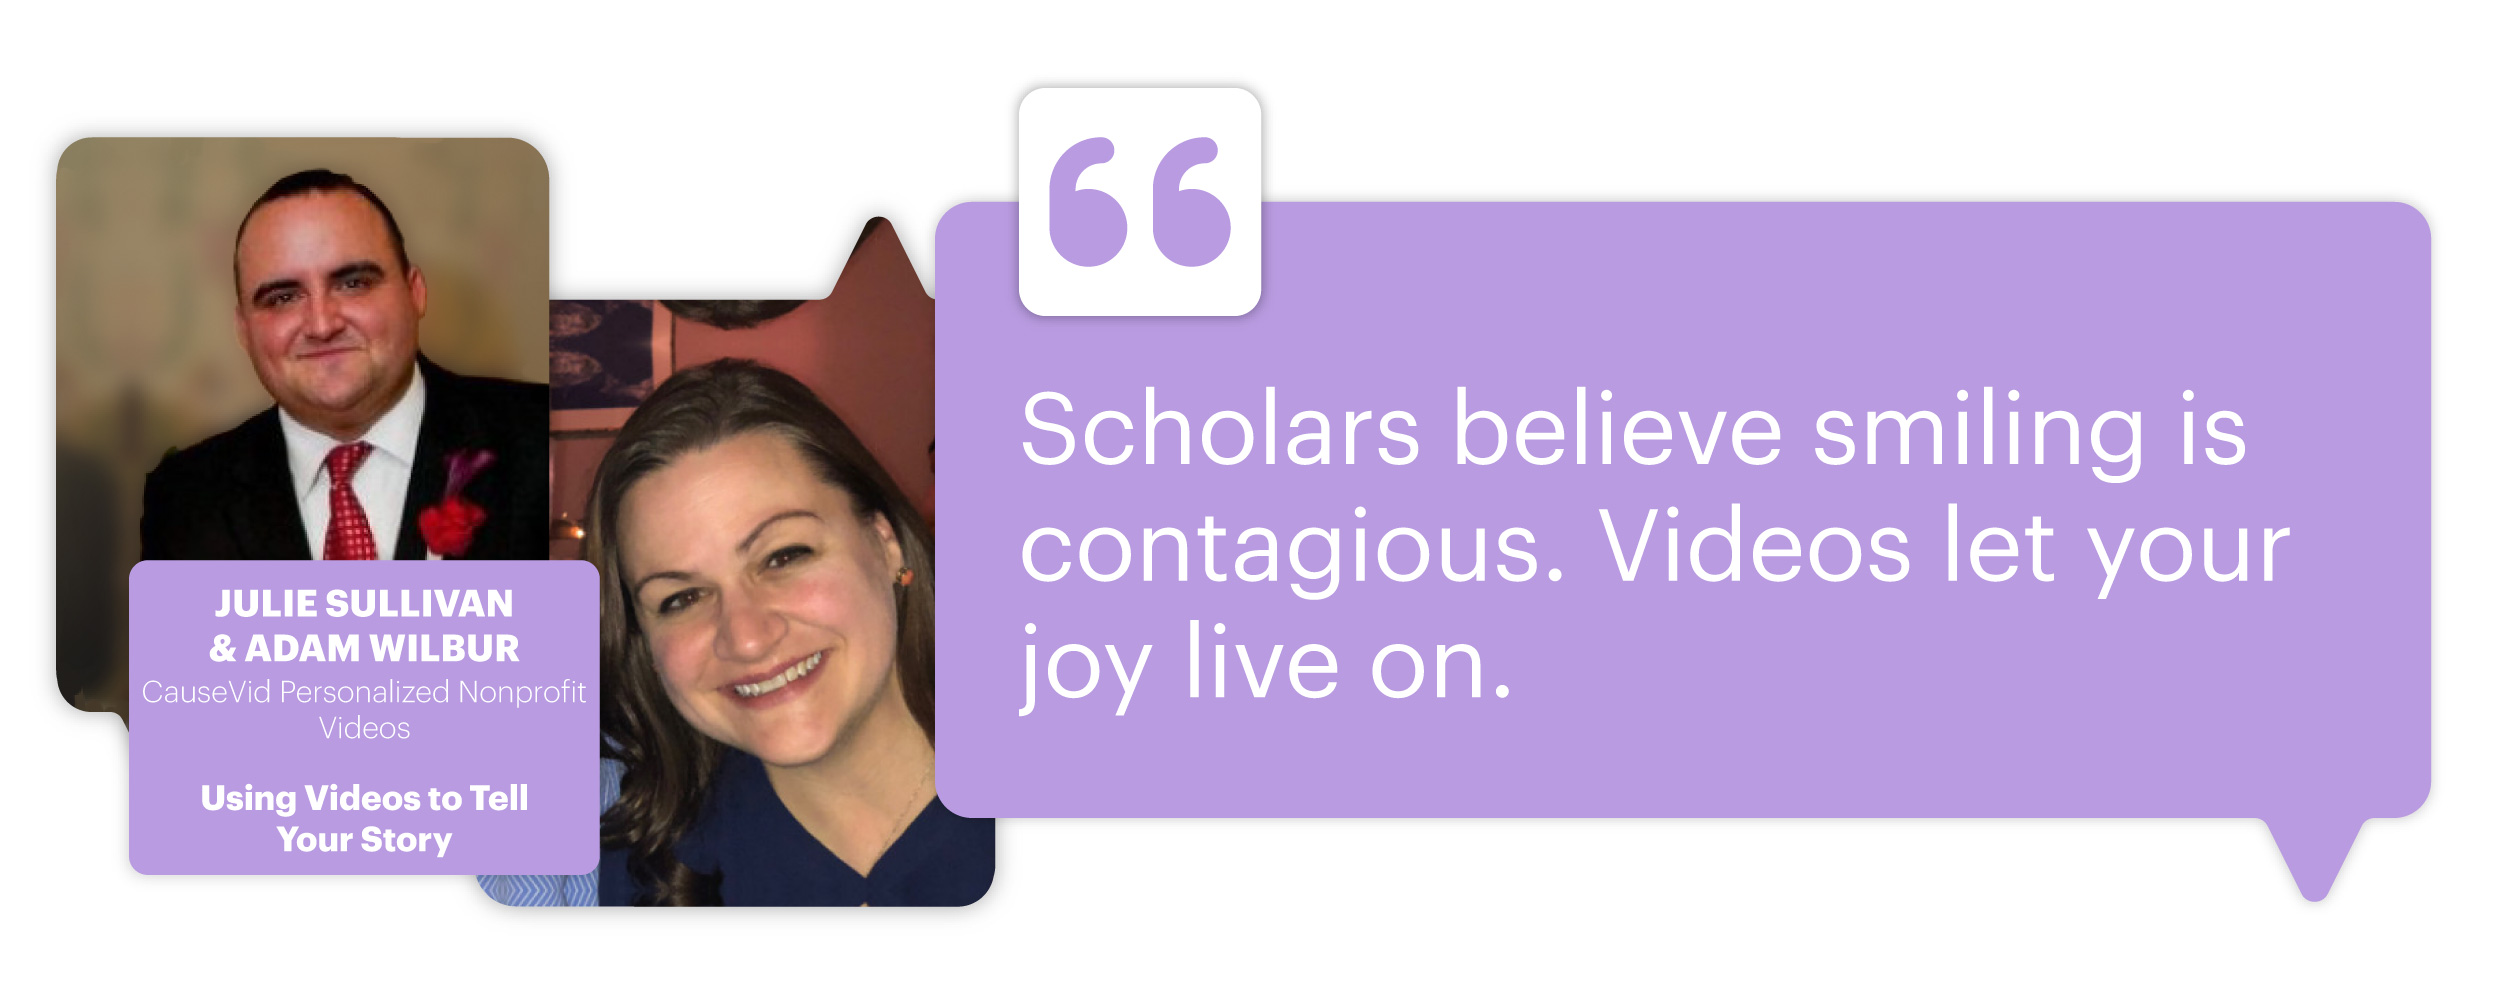 Using Videos to Tell Your Story with Julie Sullivan & Adam Wilbur, CauseVid Personalized Nonprofit Videos; "Scholars believe smiling is contagious. Videos let your joy live on."